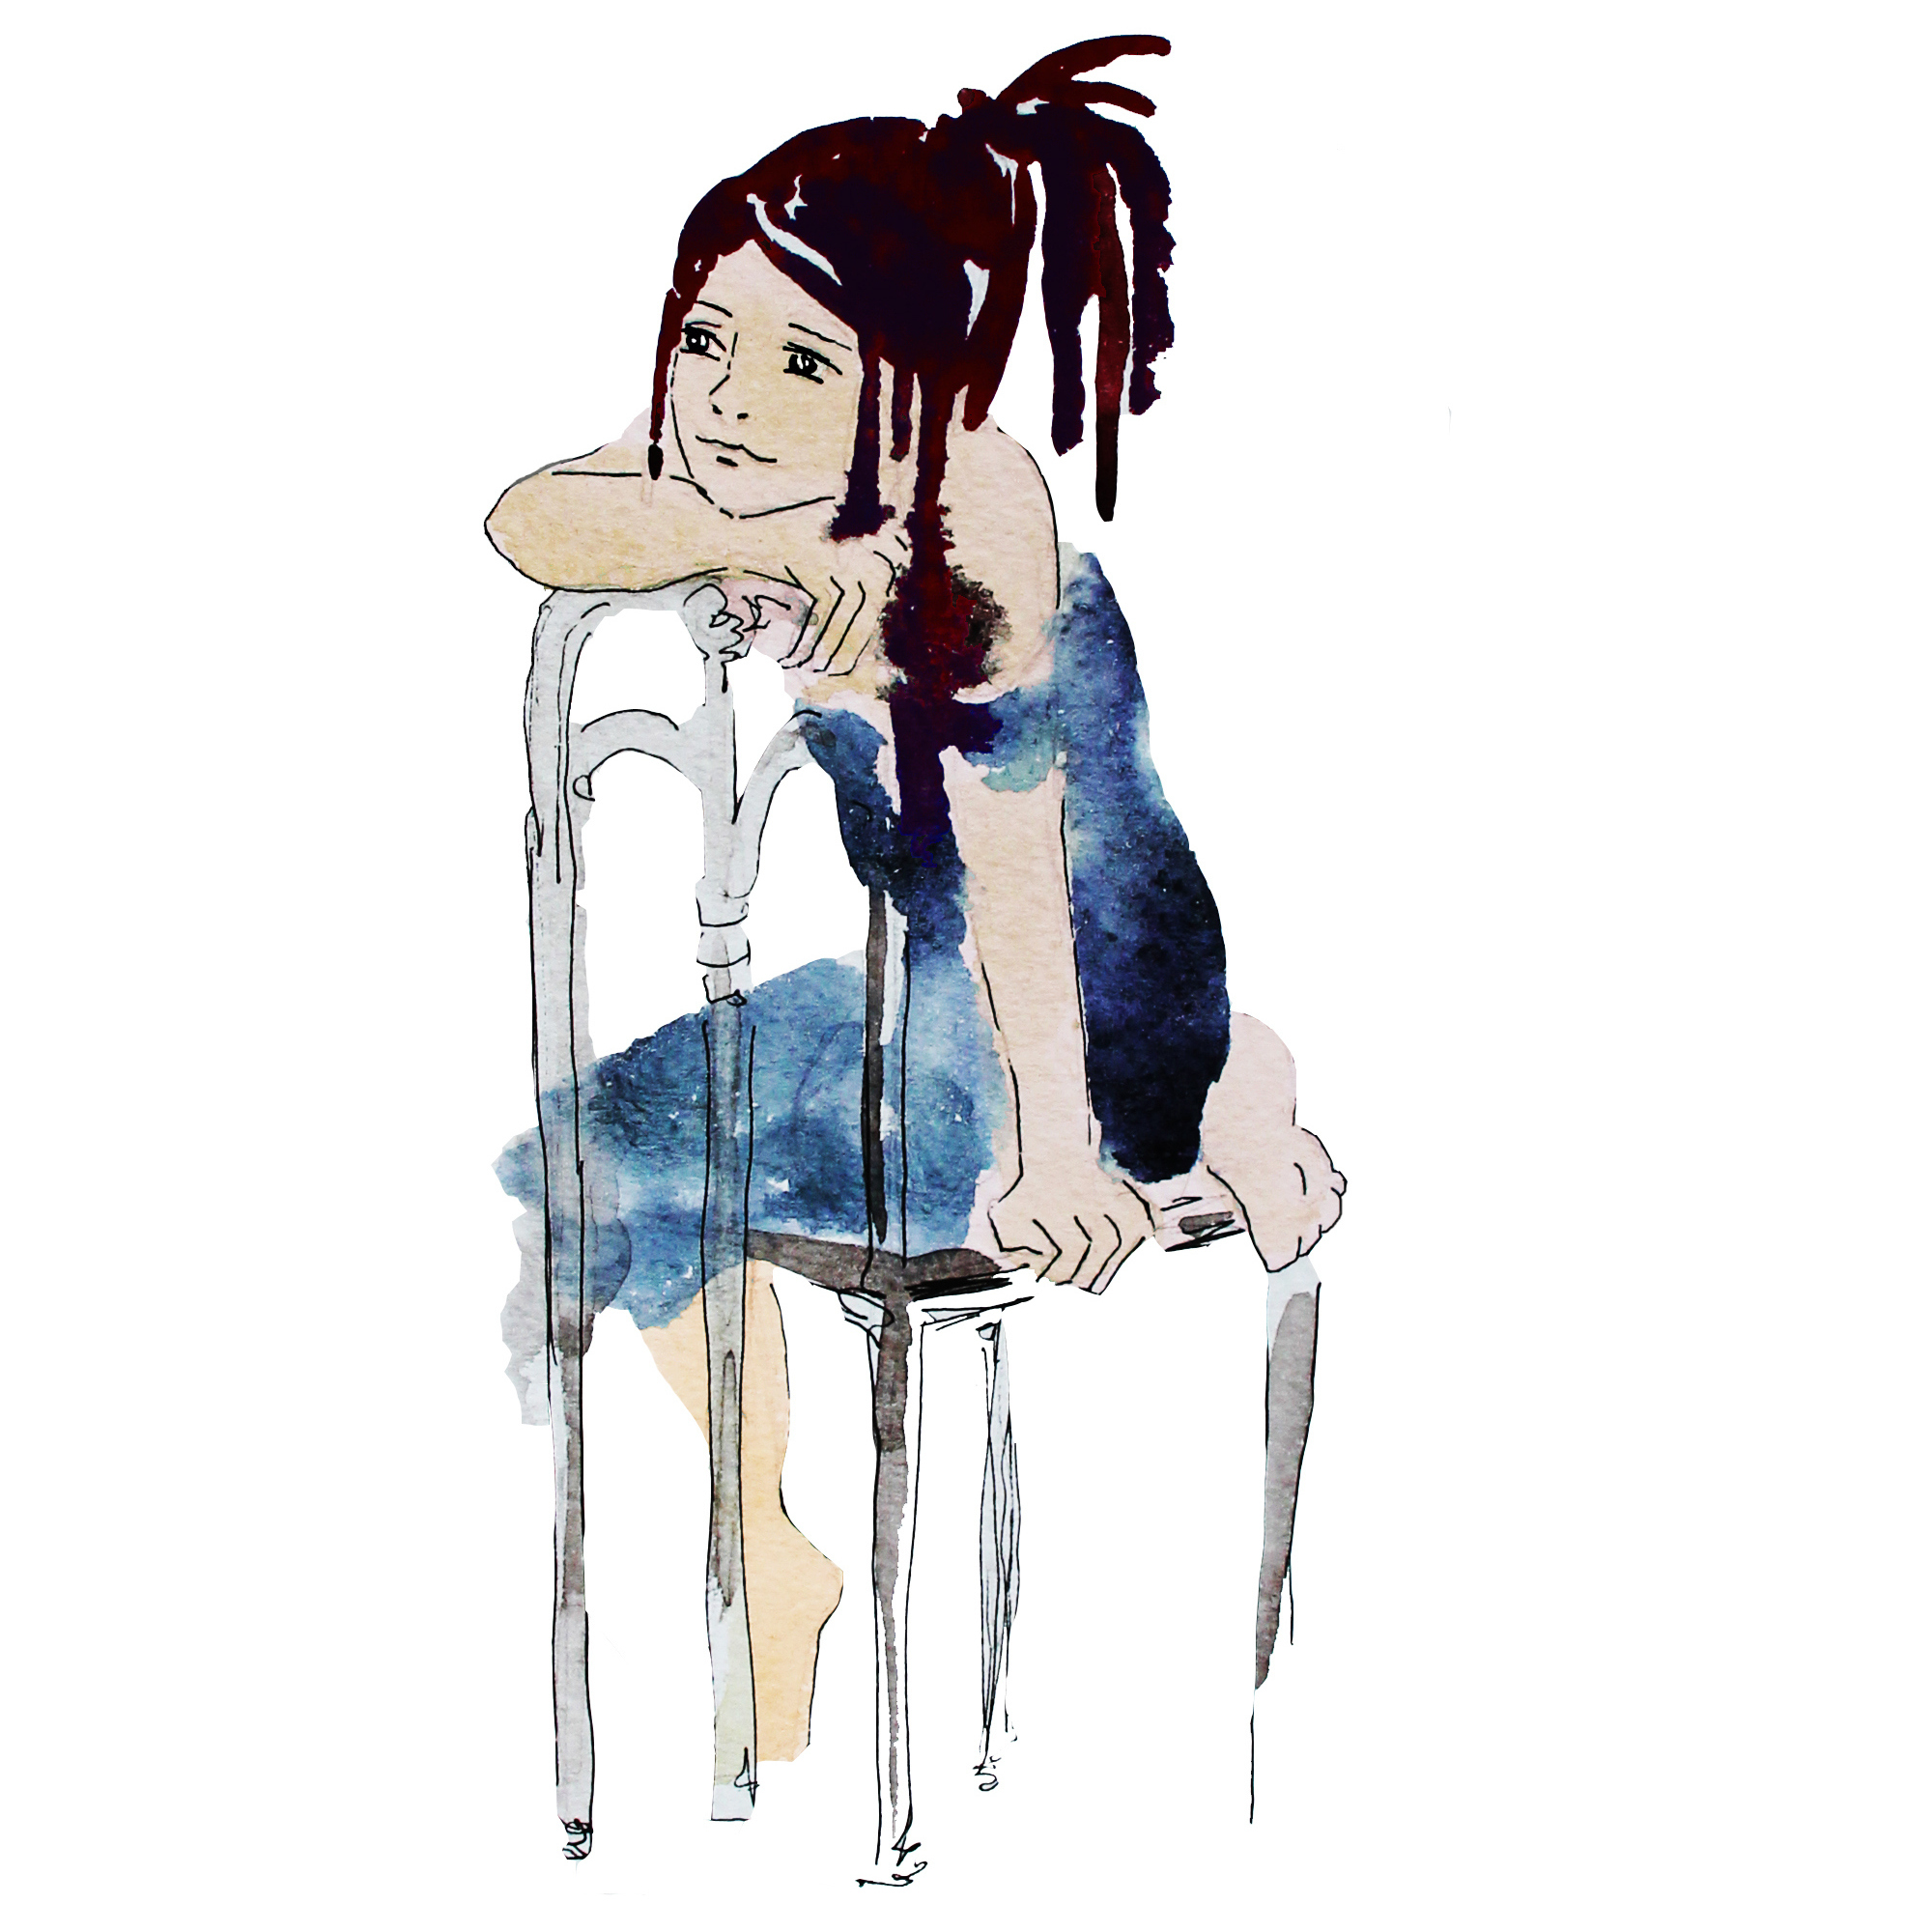 A water color image of a woman sitting at a chair, with a sad, tired expression.